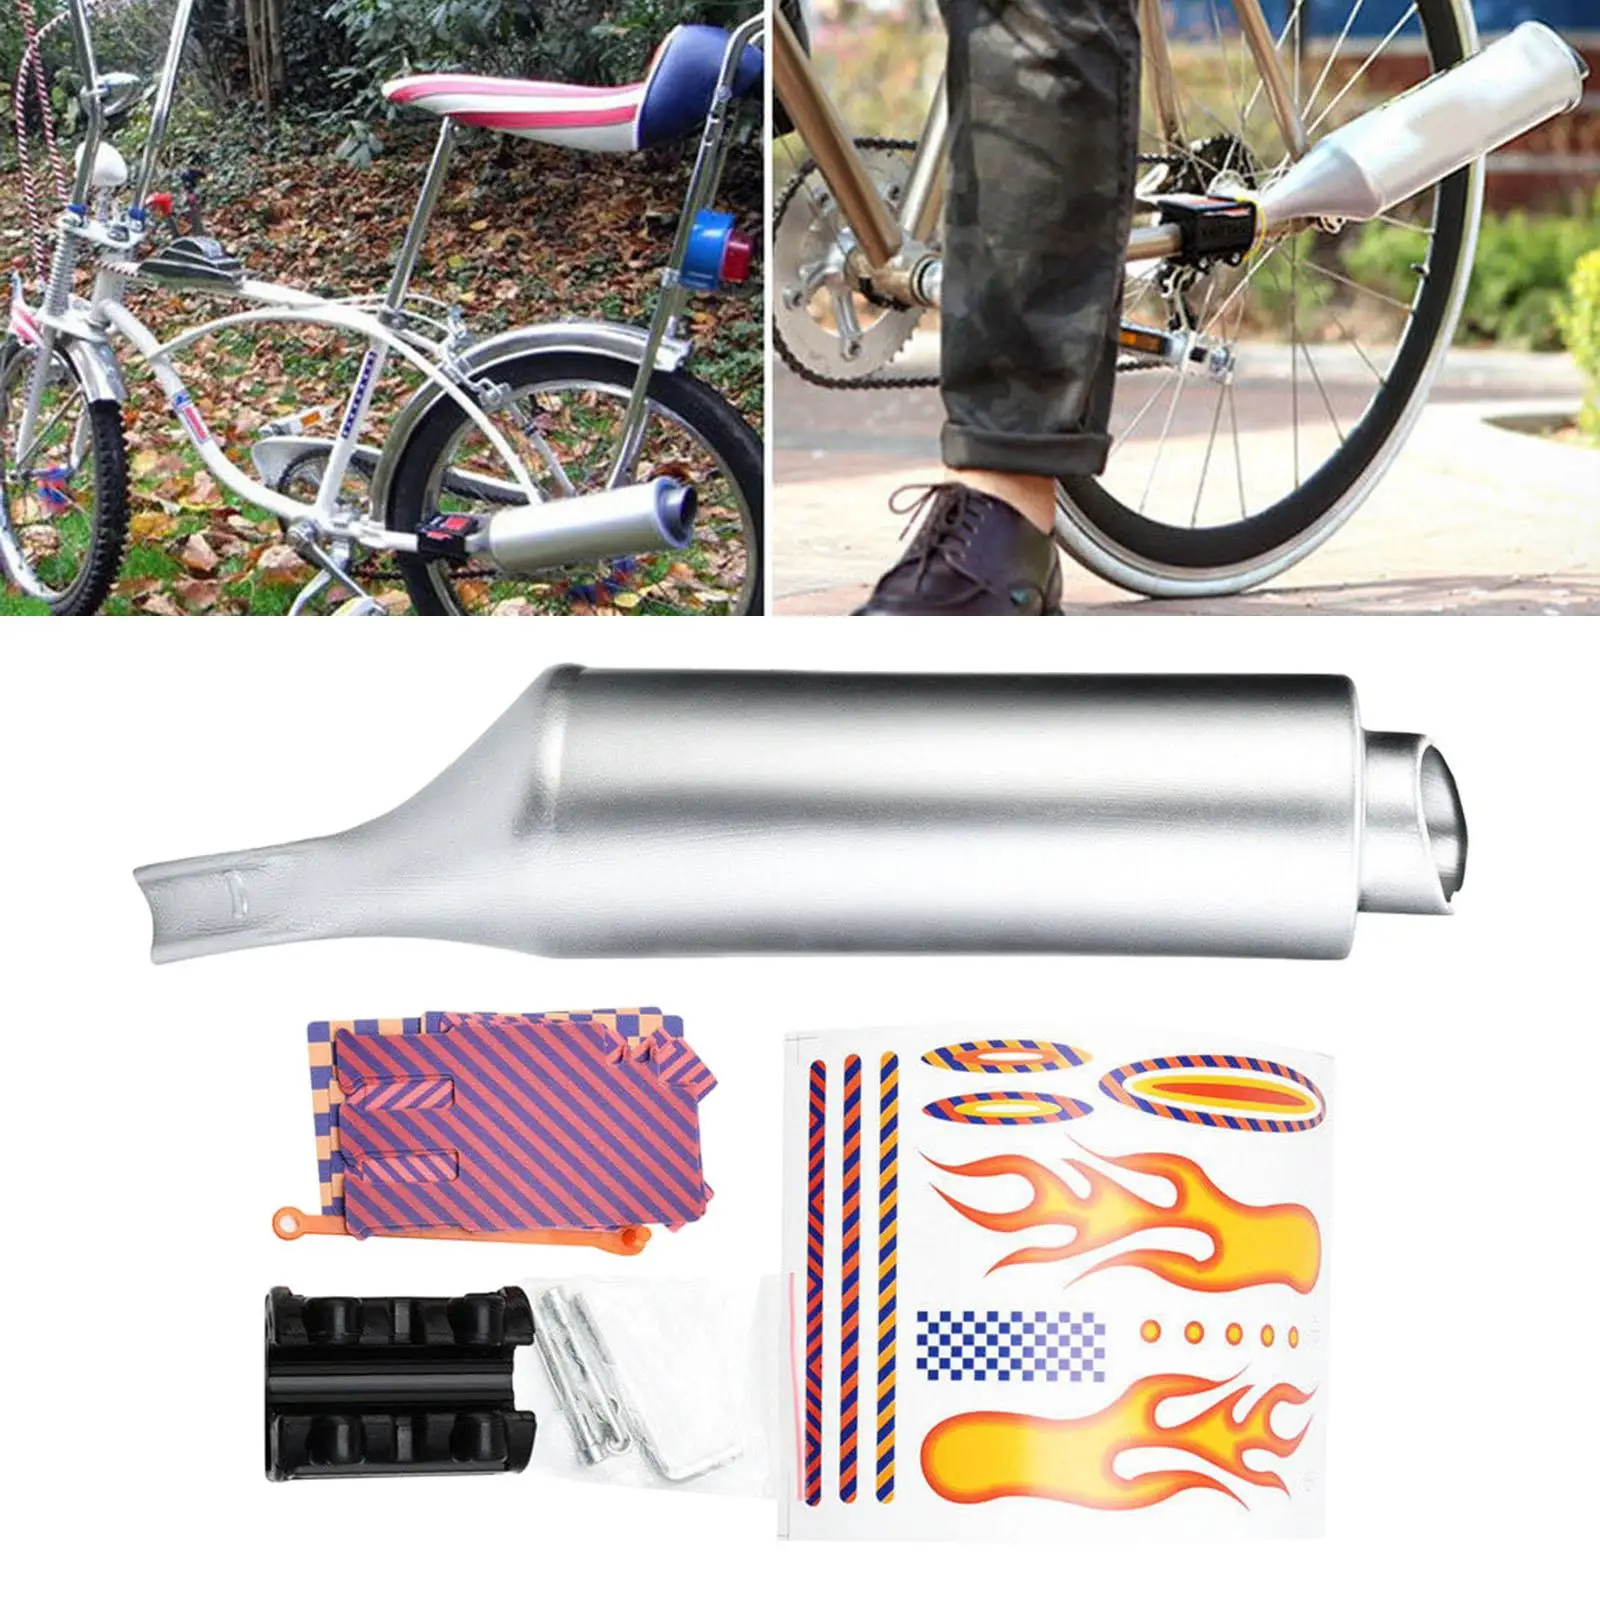 Exhaust Sound System,Motorcycle Sound Exhaust Bike Engine Cycling Accessory for